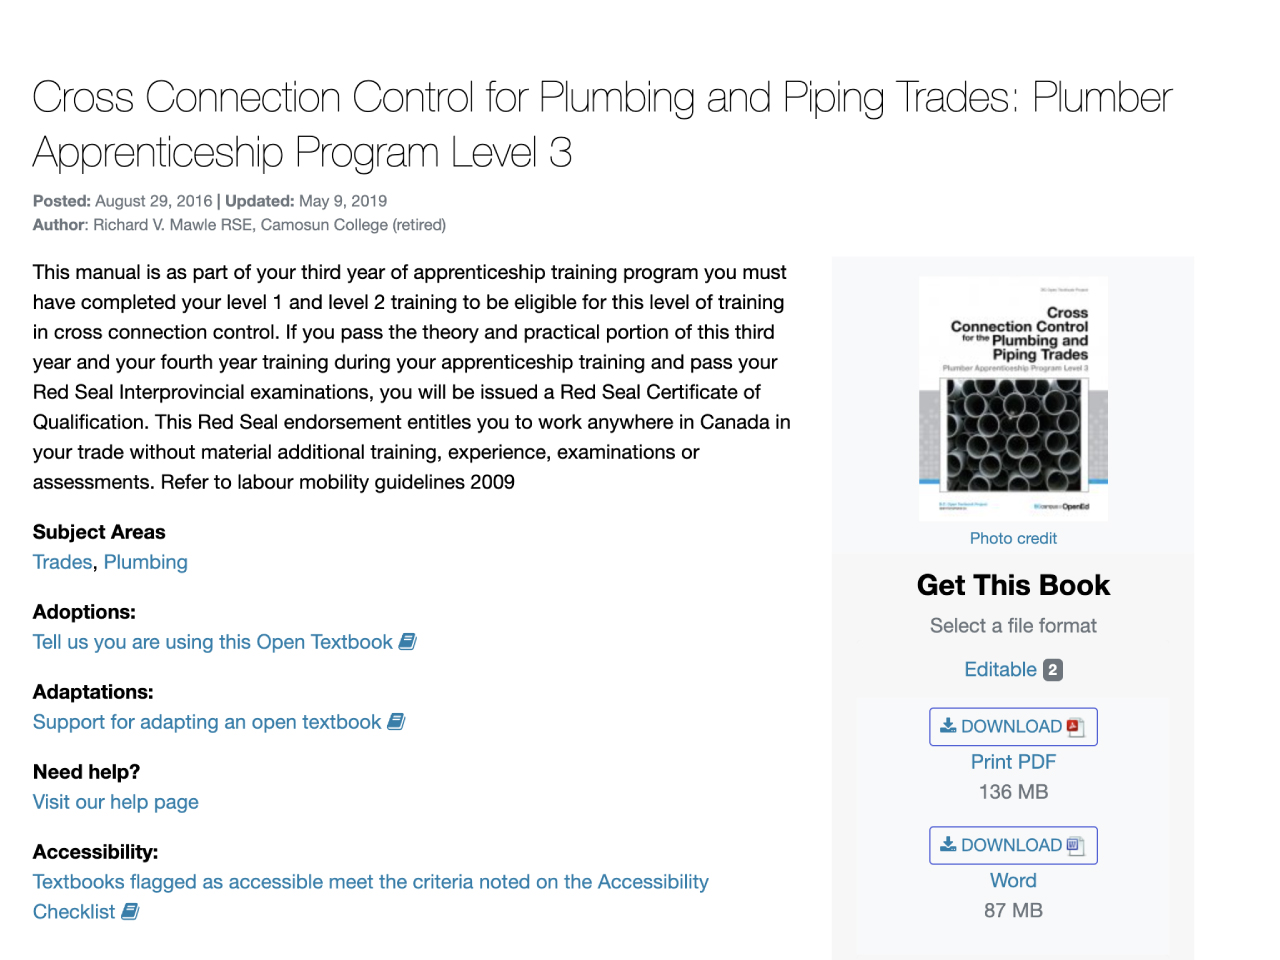 Plumber apprenticeship program, Level 3. Cross connection control for plumbing and piping trades